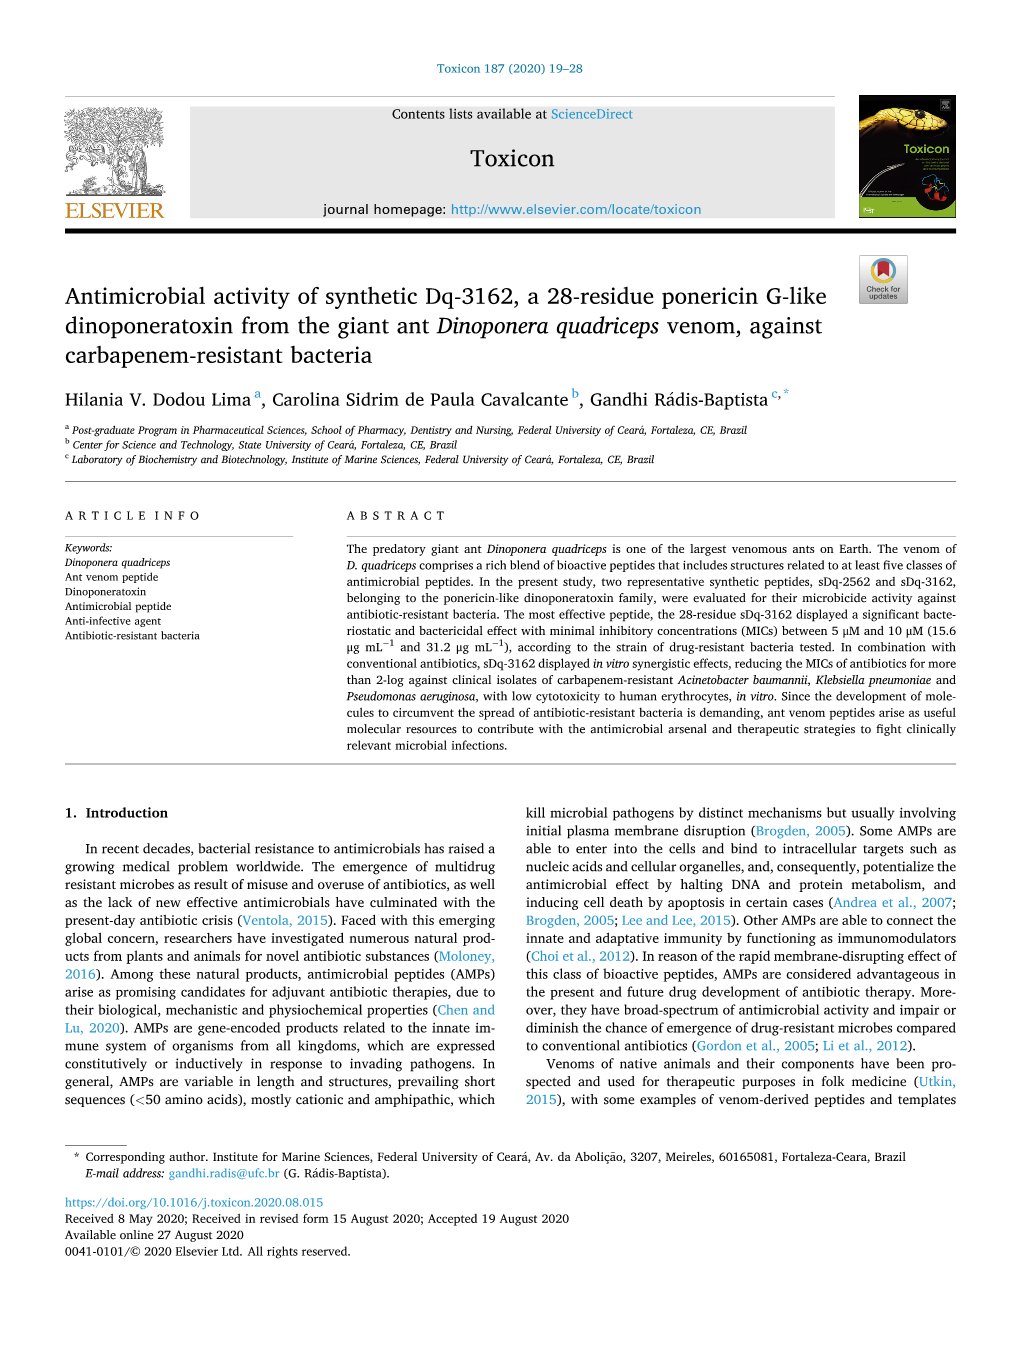 Antimicrobial Activity of Synthetic Dq-3162, a 28-Residue Ponericin G